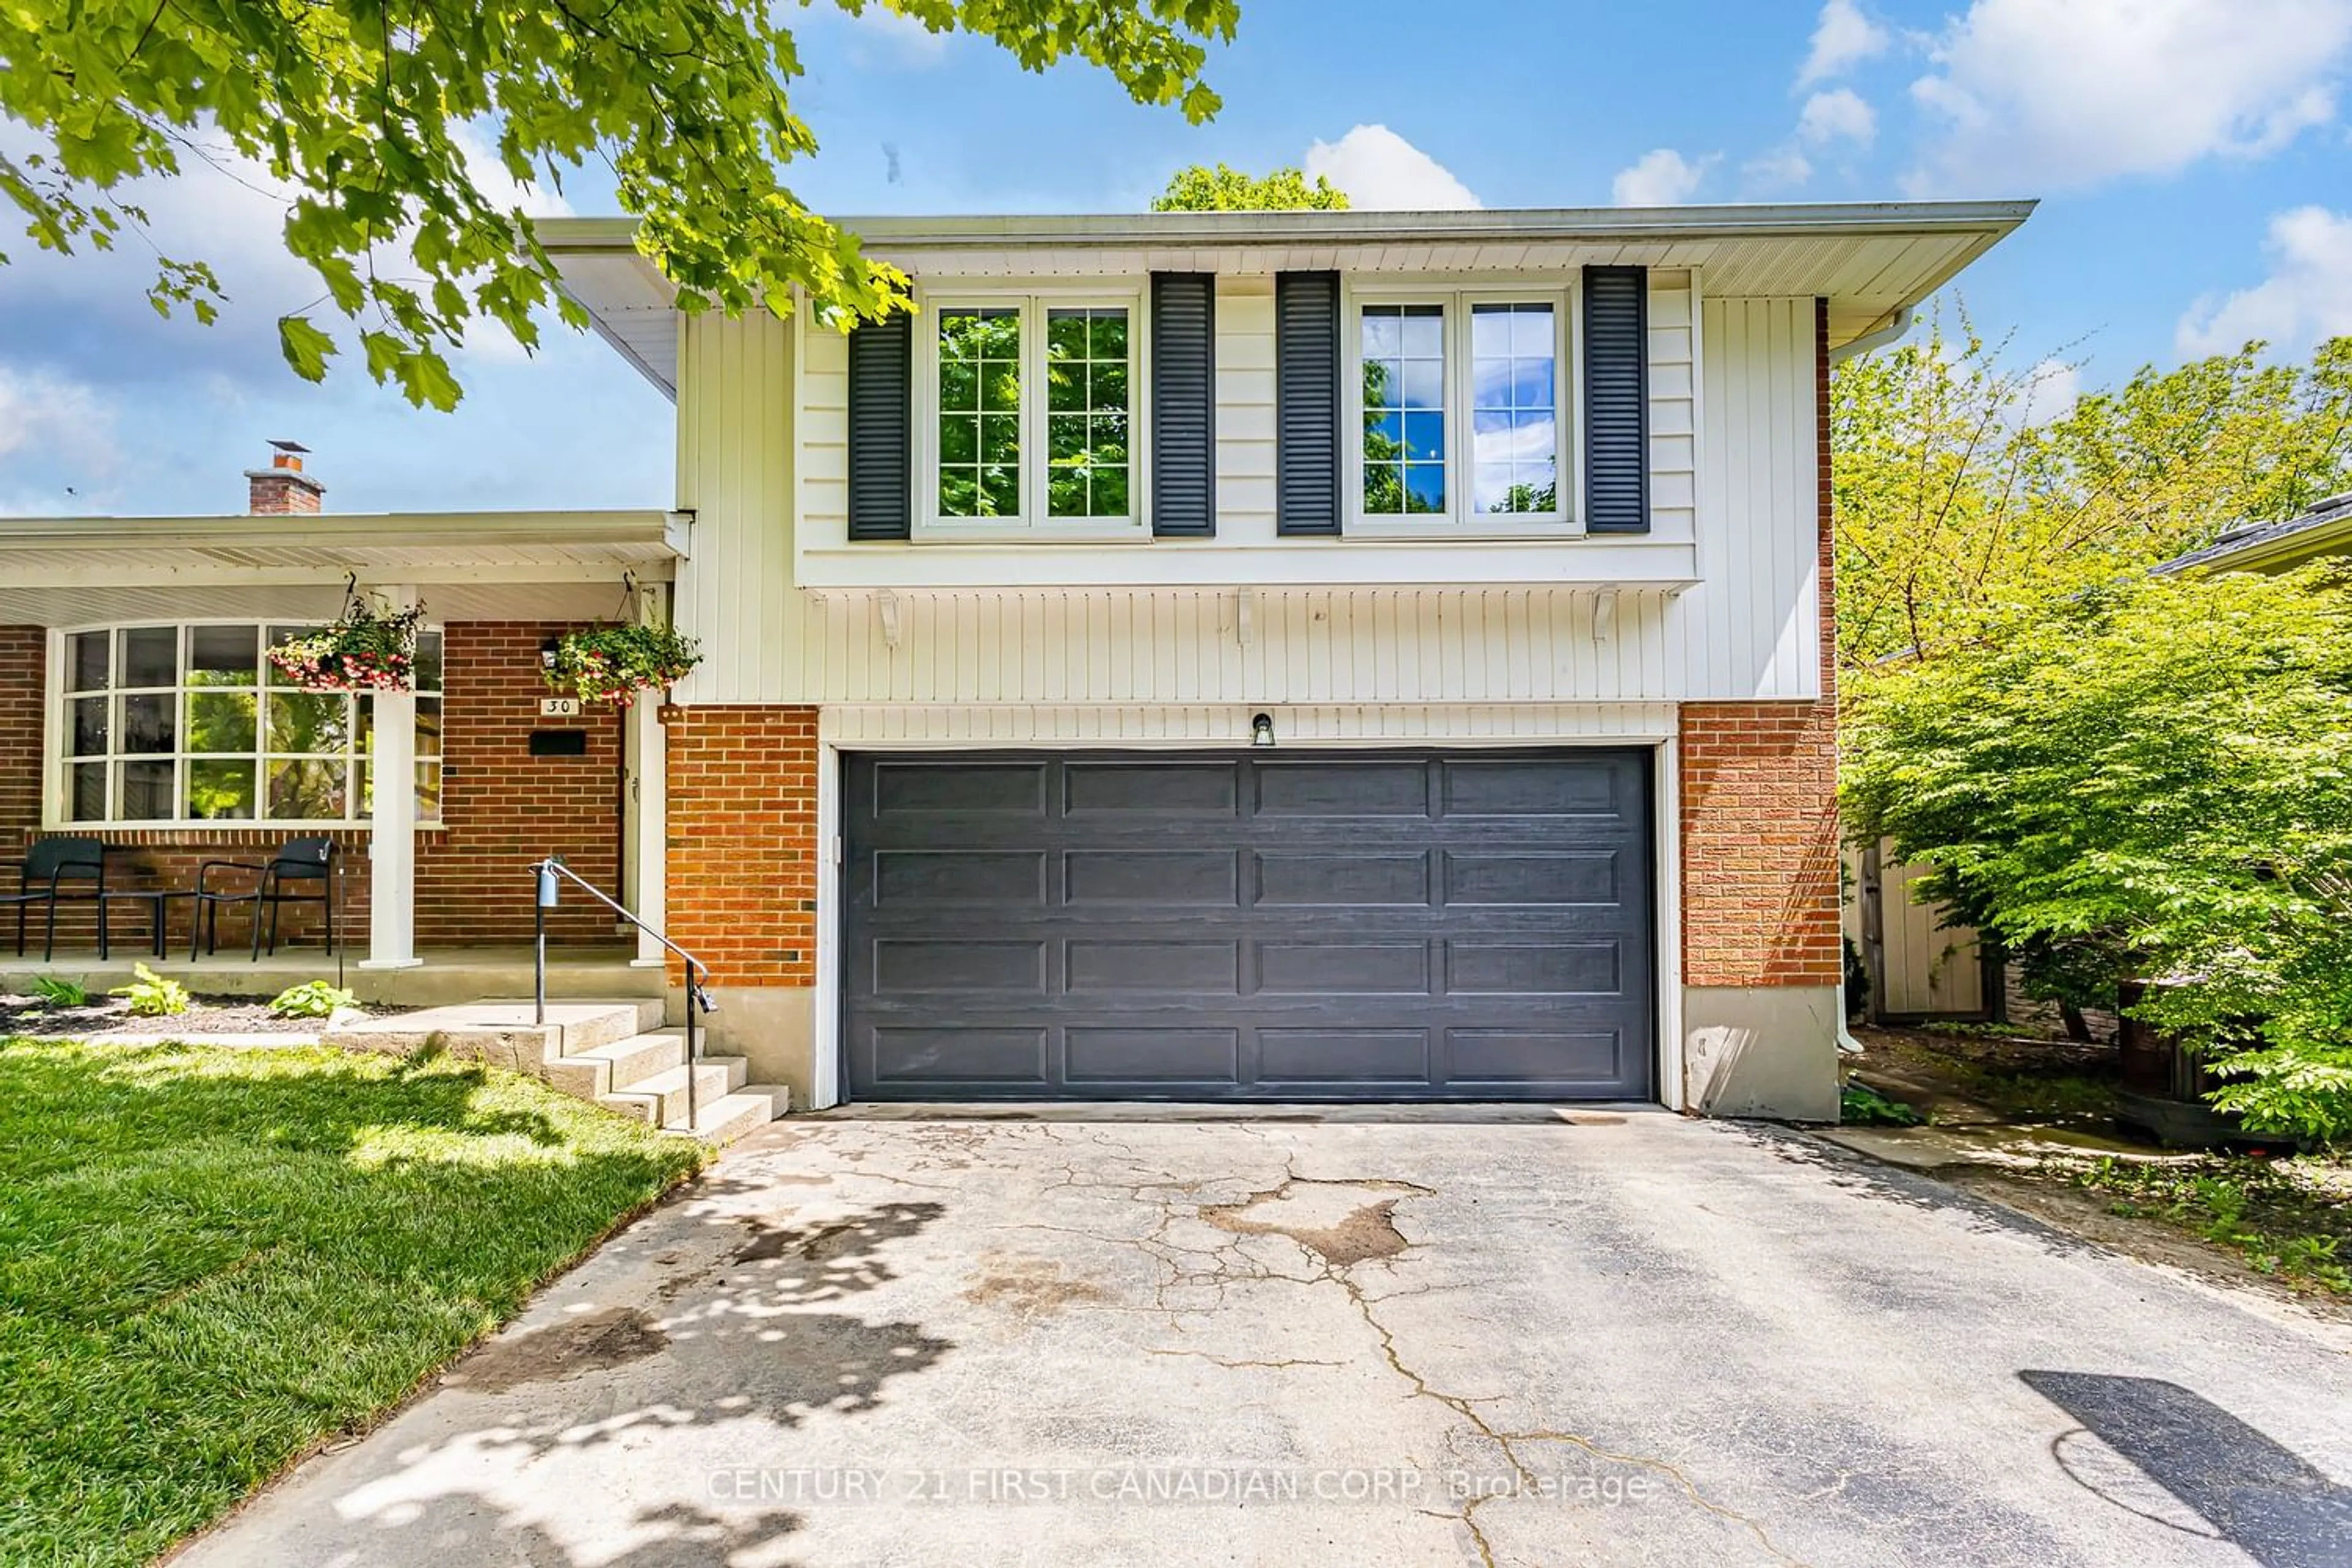 Home with brick exterior material for 30 Springfield Cres, London Ontario N6K 2T6